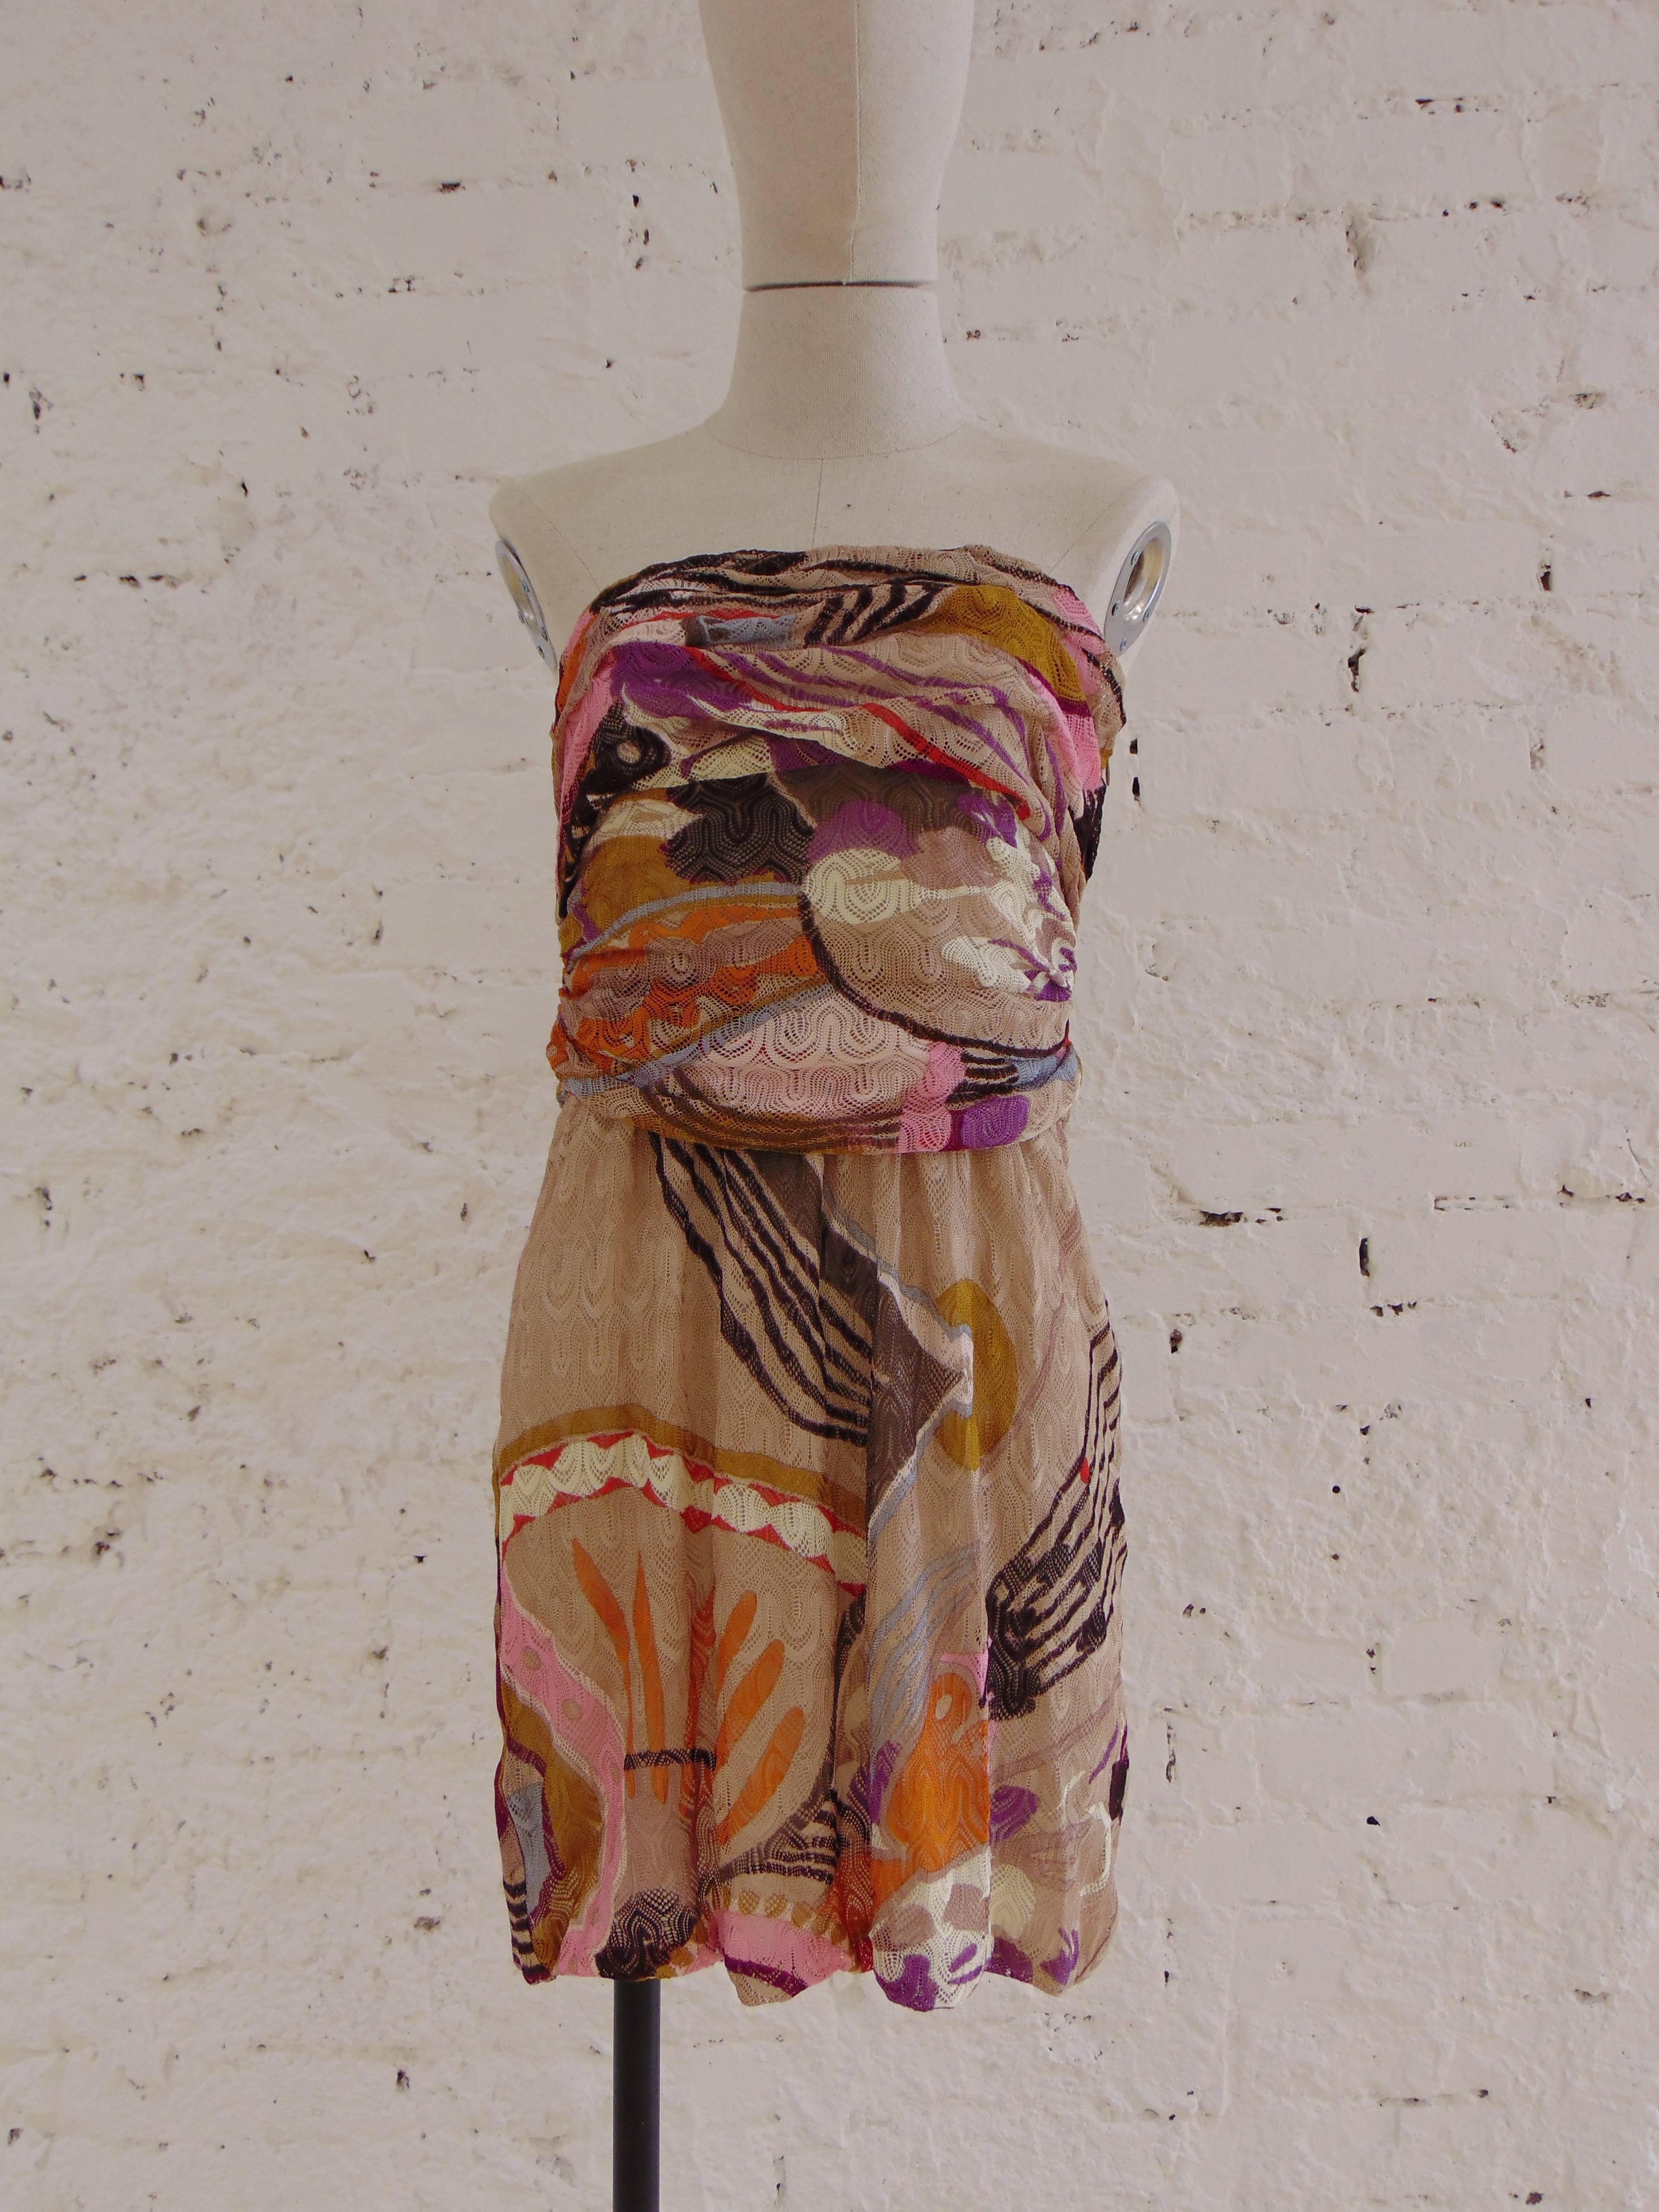 Missoni multicoloured cotton dress

1990s multicoloured dress by Missoni totally made in italy in cotton
Size 42